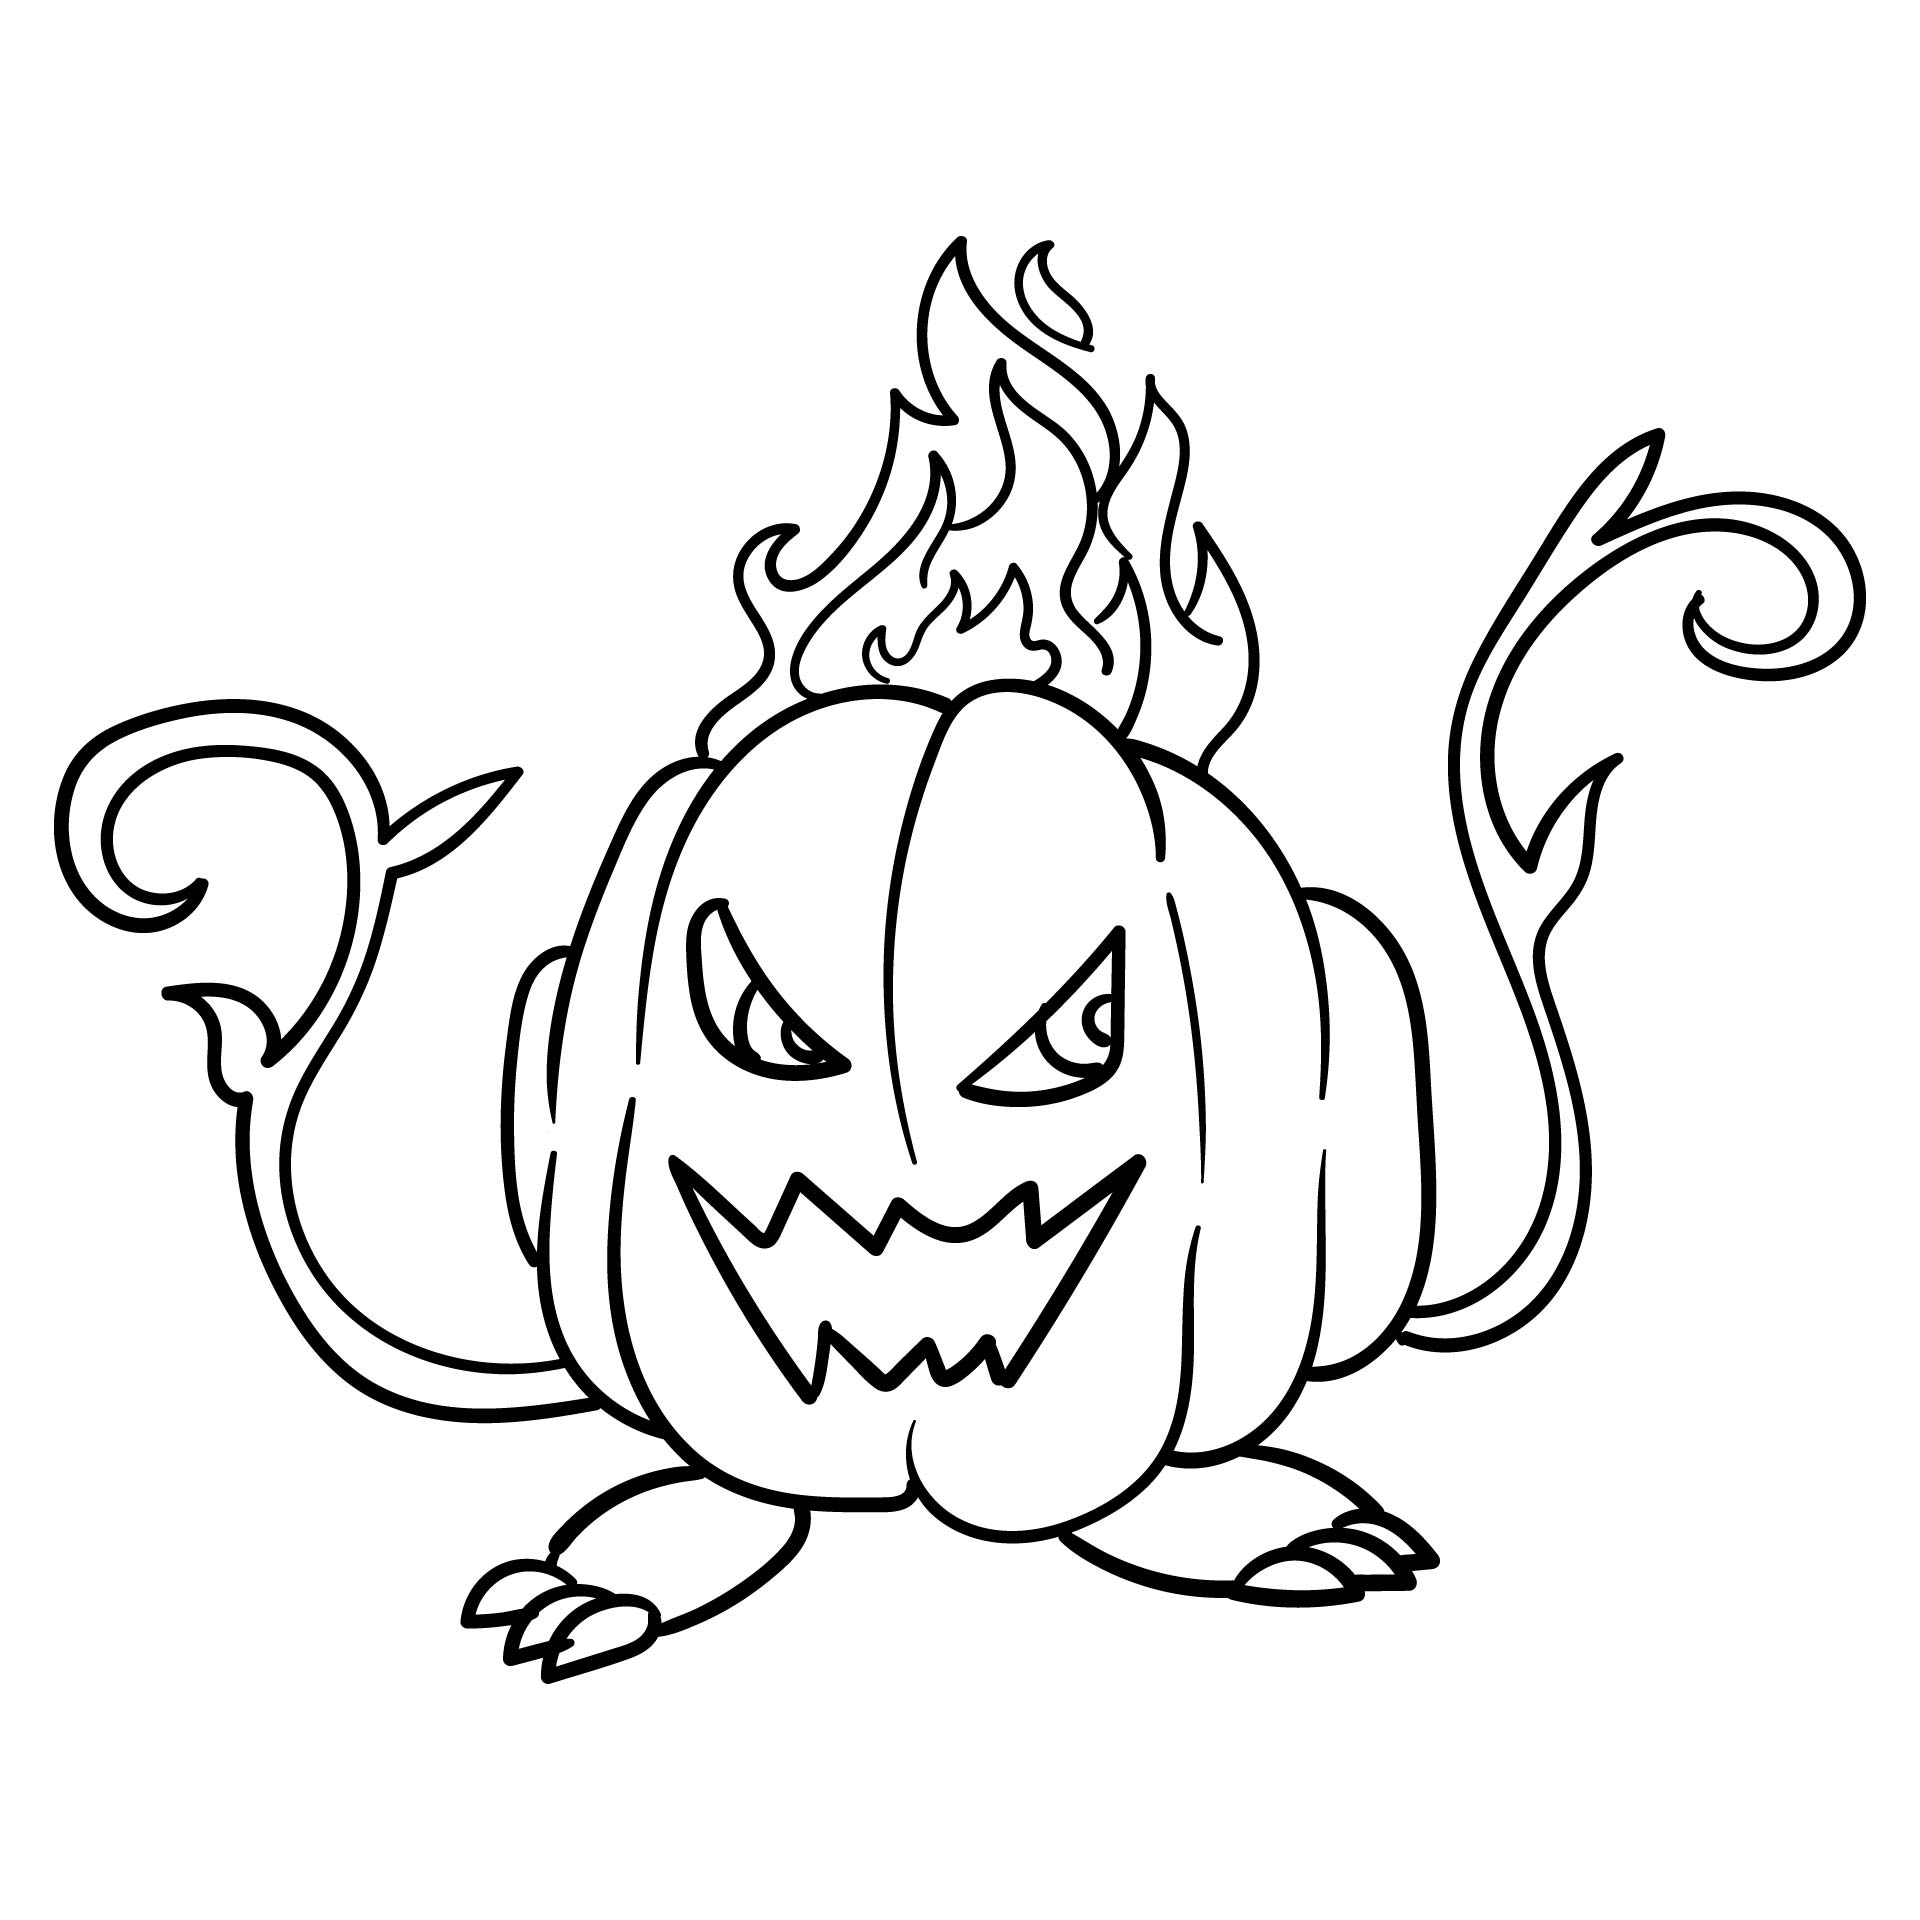 Halloween Coloring Pages For Adults Easy